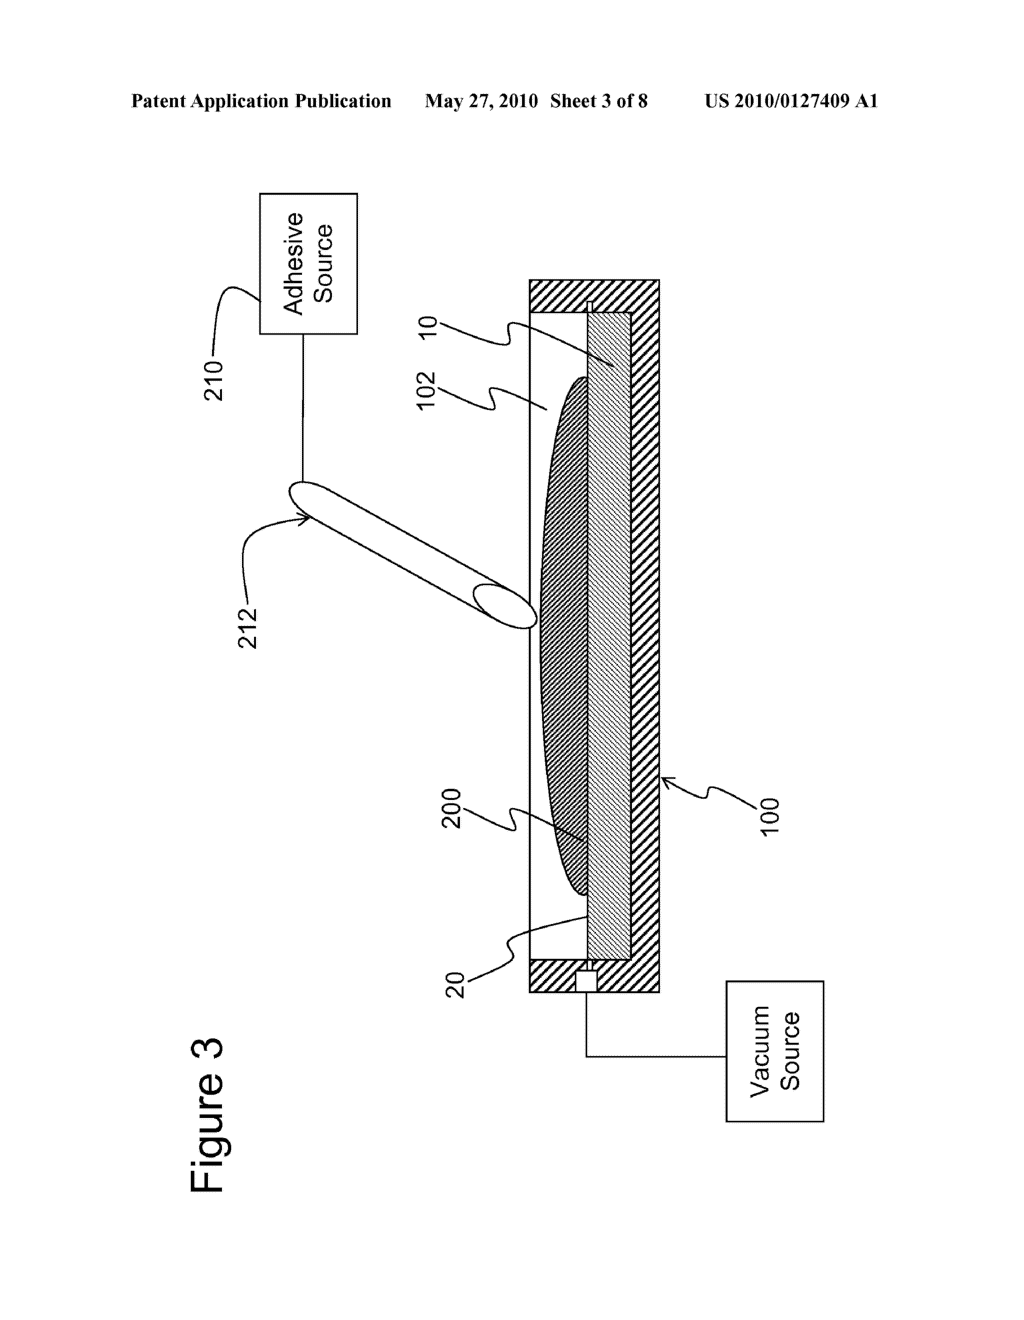 MICROELECTRONIC DEVICE WAFERS INCLUDING AN IN-SITU MOLDED ADHESIVE, MOLDS FOR IN-SITU MOLDING ADHESIVES ON MICROELECTRONIC DEVICE WAFERS, AND METHODS OF MOLDING ADHESIVES ON MICROELECTRONIC DEVICE WAFERS - diagram, schematic, and image 04